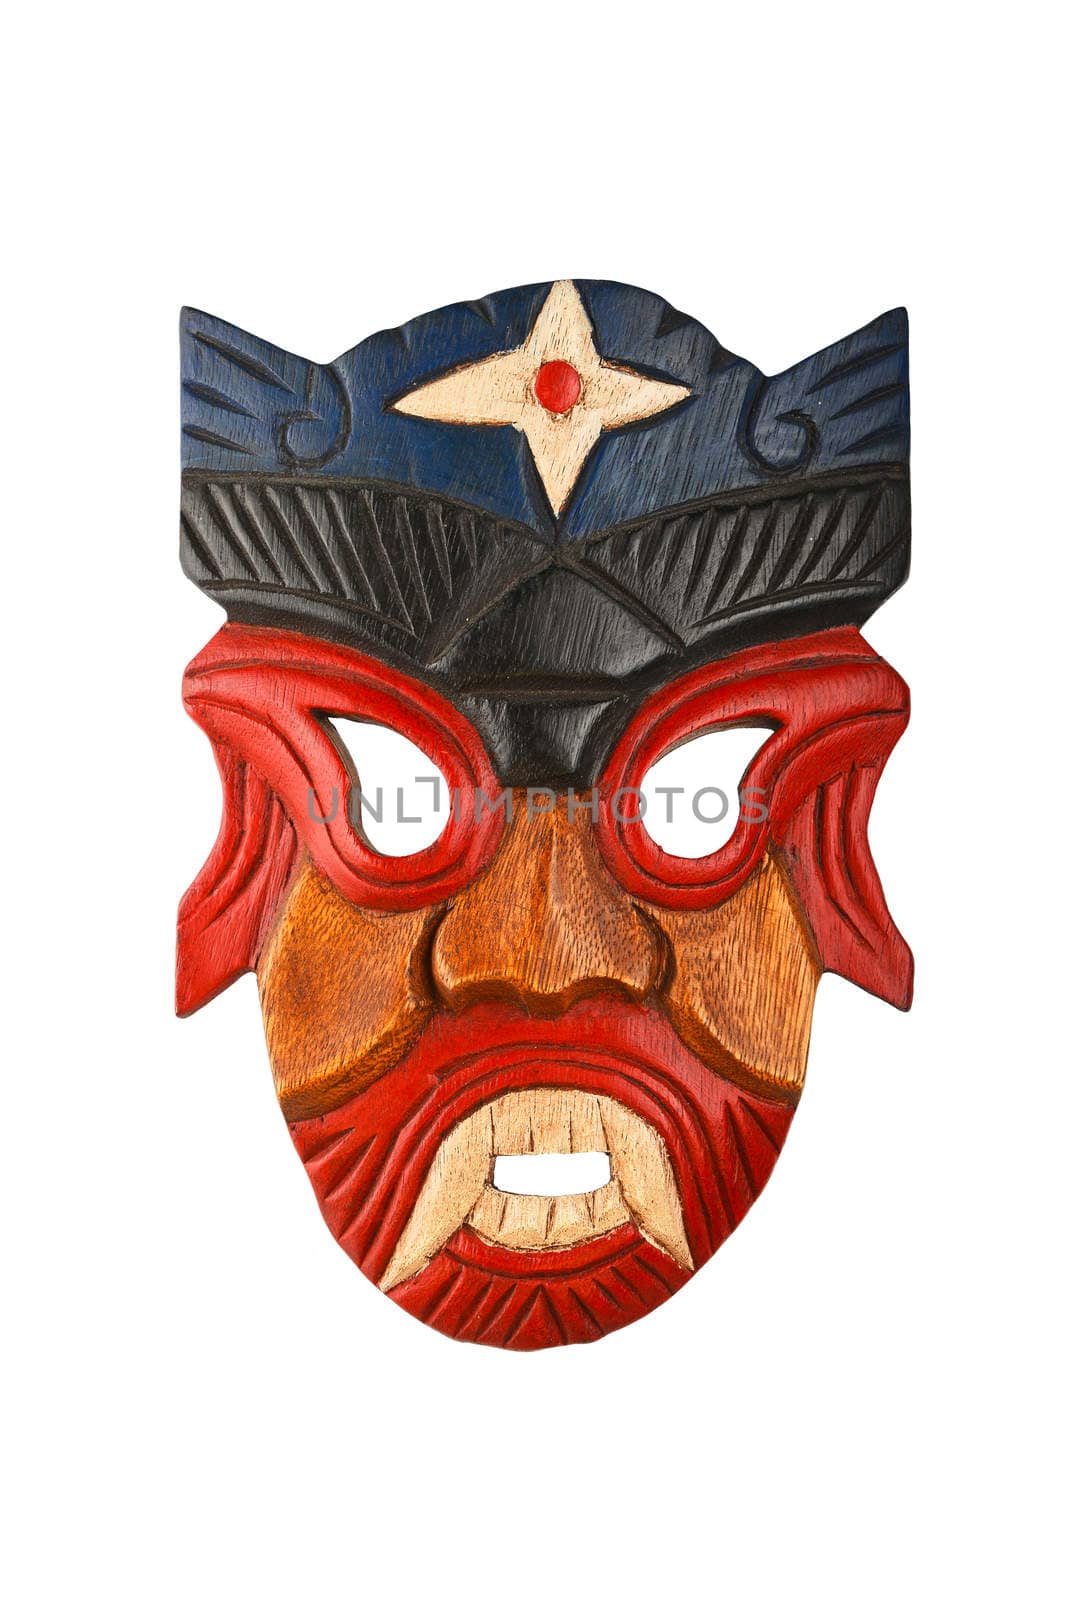 Asian traditional wooden carved mask with face of human or demon painted with vivid red and blue isolated on white background